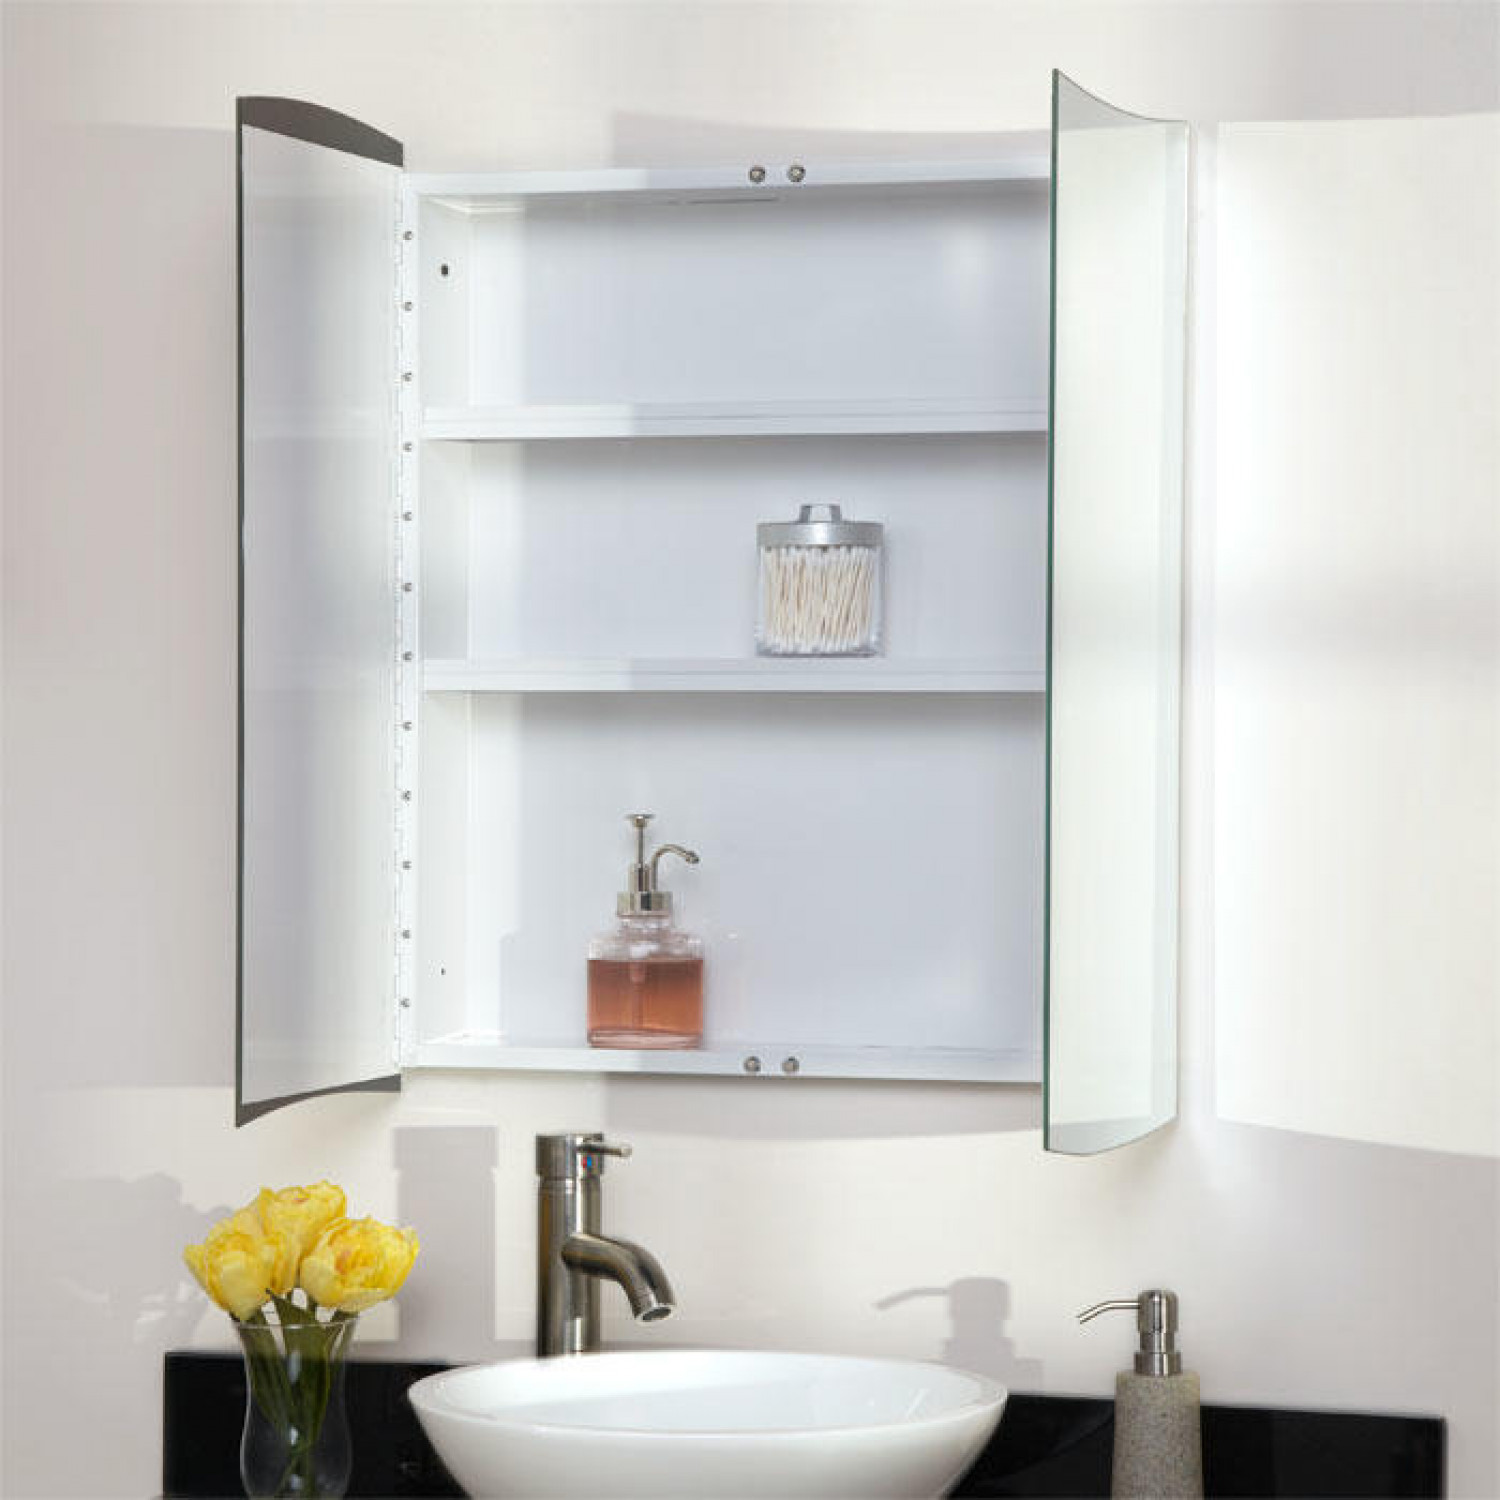 Bathroom Medicine Cabinets Recessed
 Gatewood Stainless Steel Recessed Medicine Cabinet White